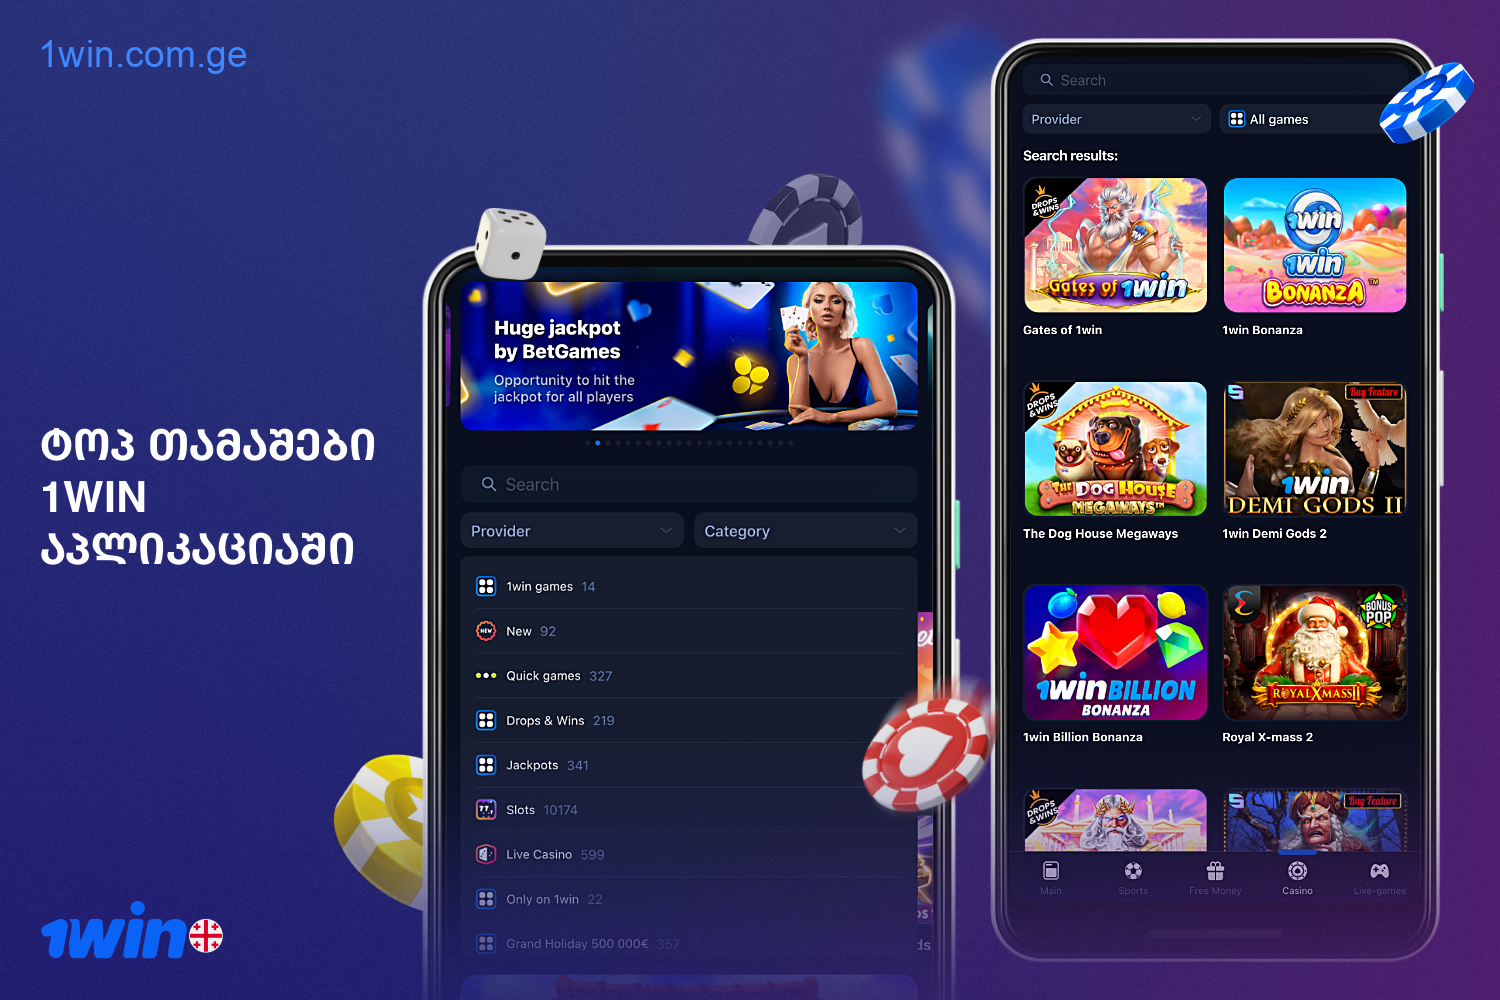 The 1win app contains hundreds of popular games in the online casino section